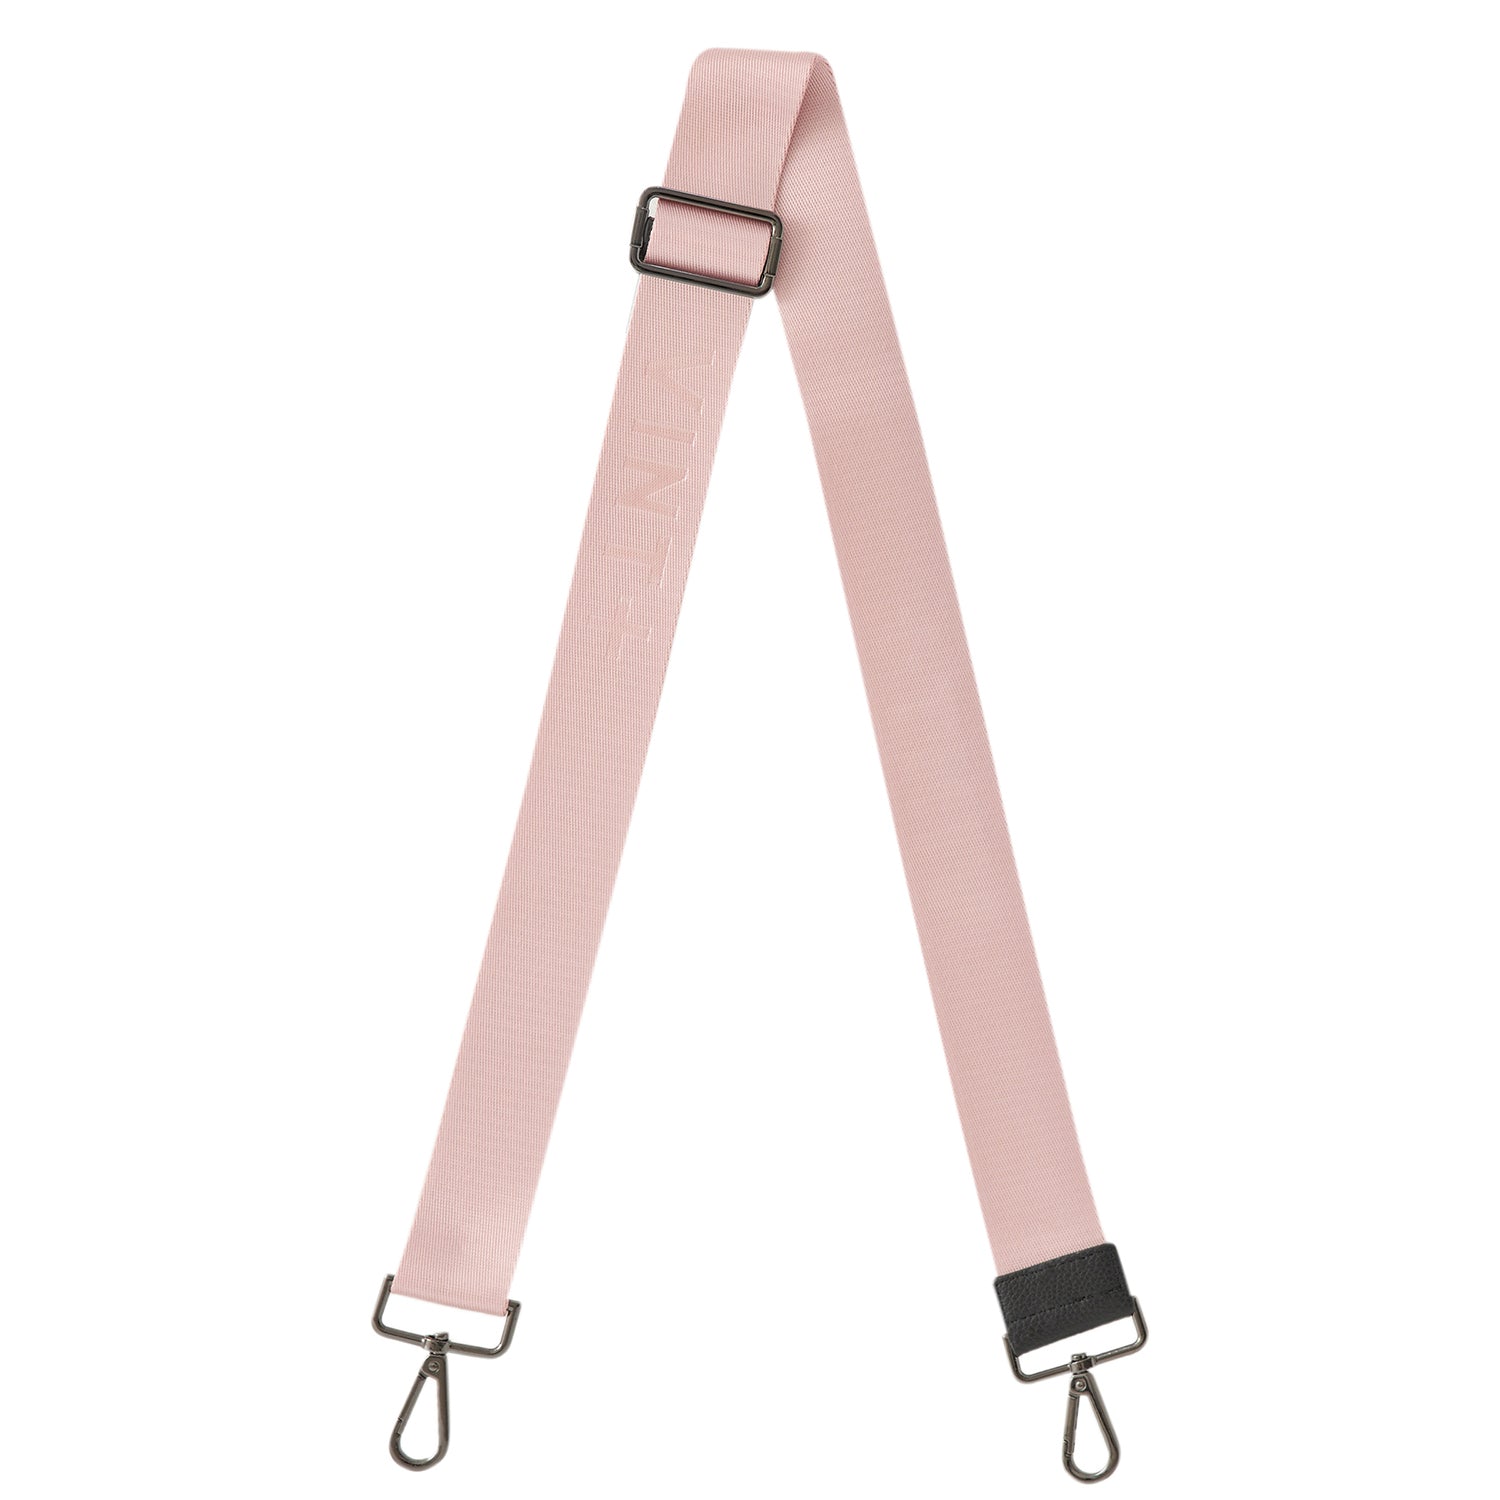 CARRY STRAP - PINK